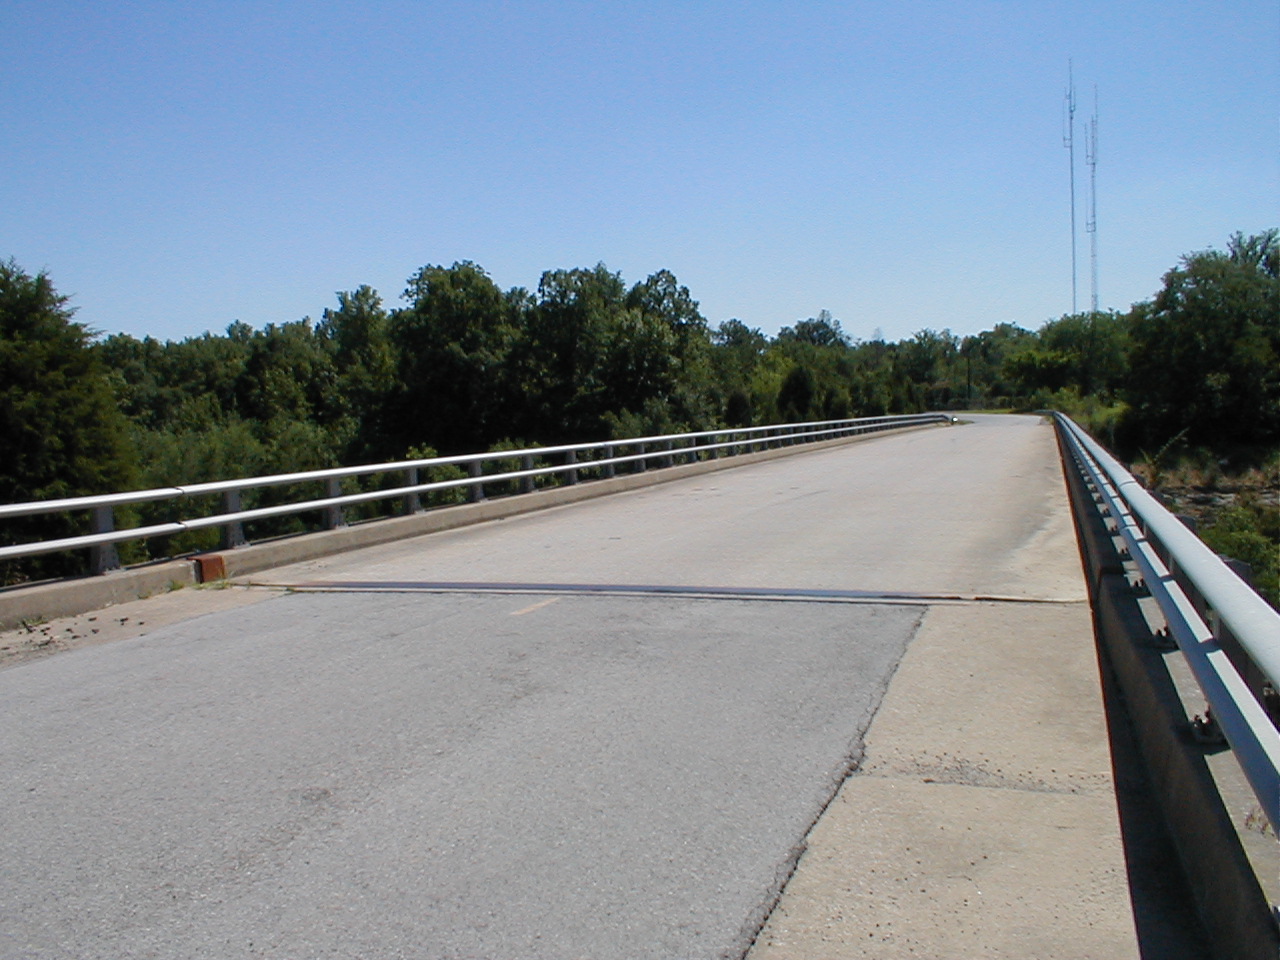 The top of the bridge looking south along Glen Lily Road.